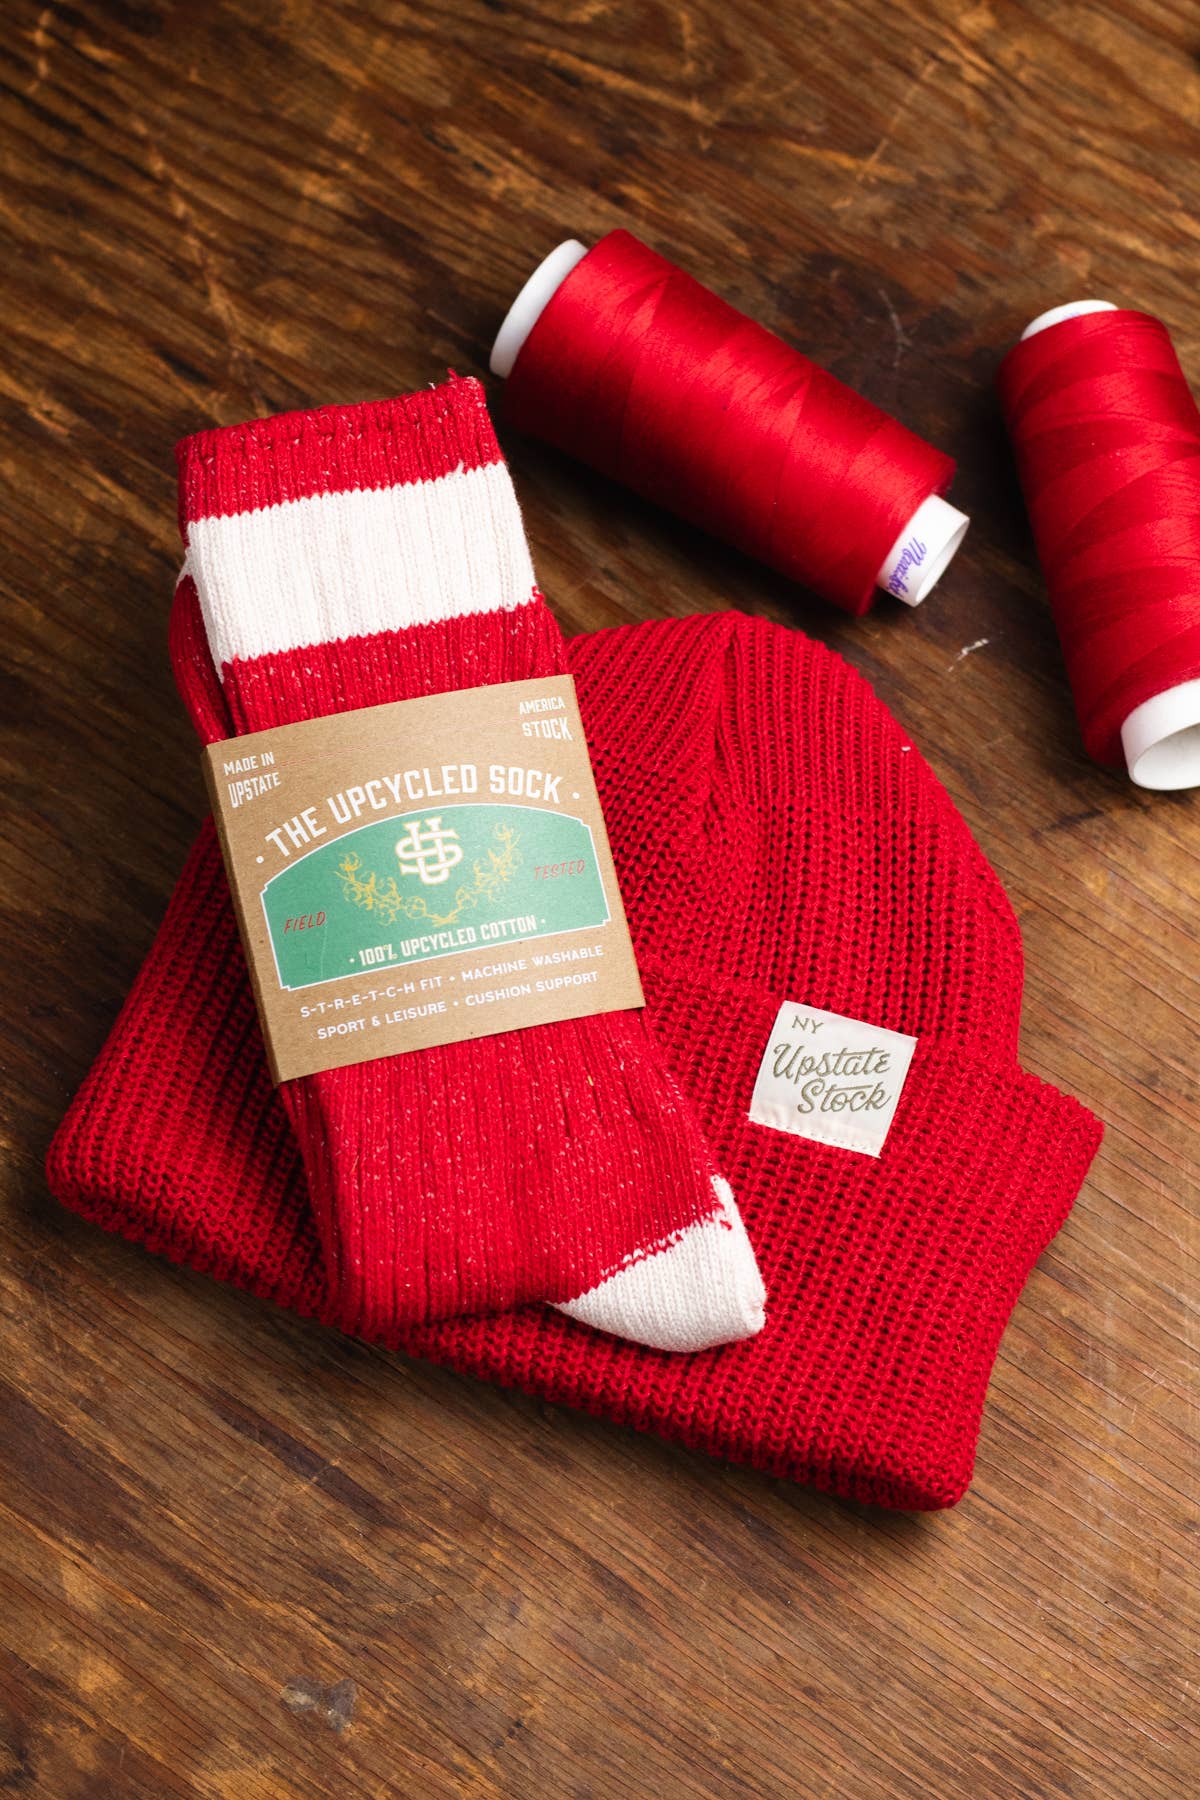 The Upcycled Sock: CHERRY RED